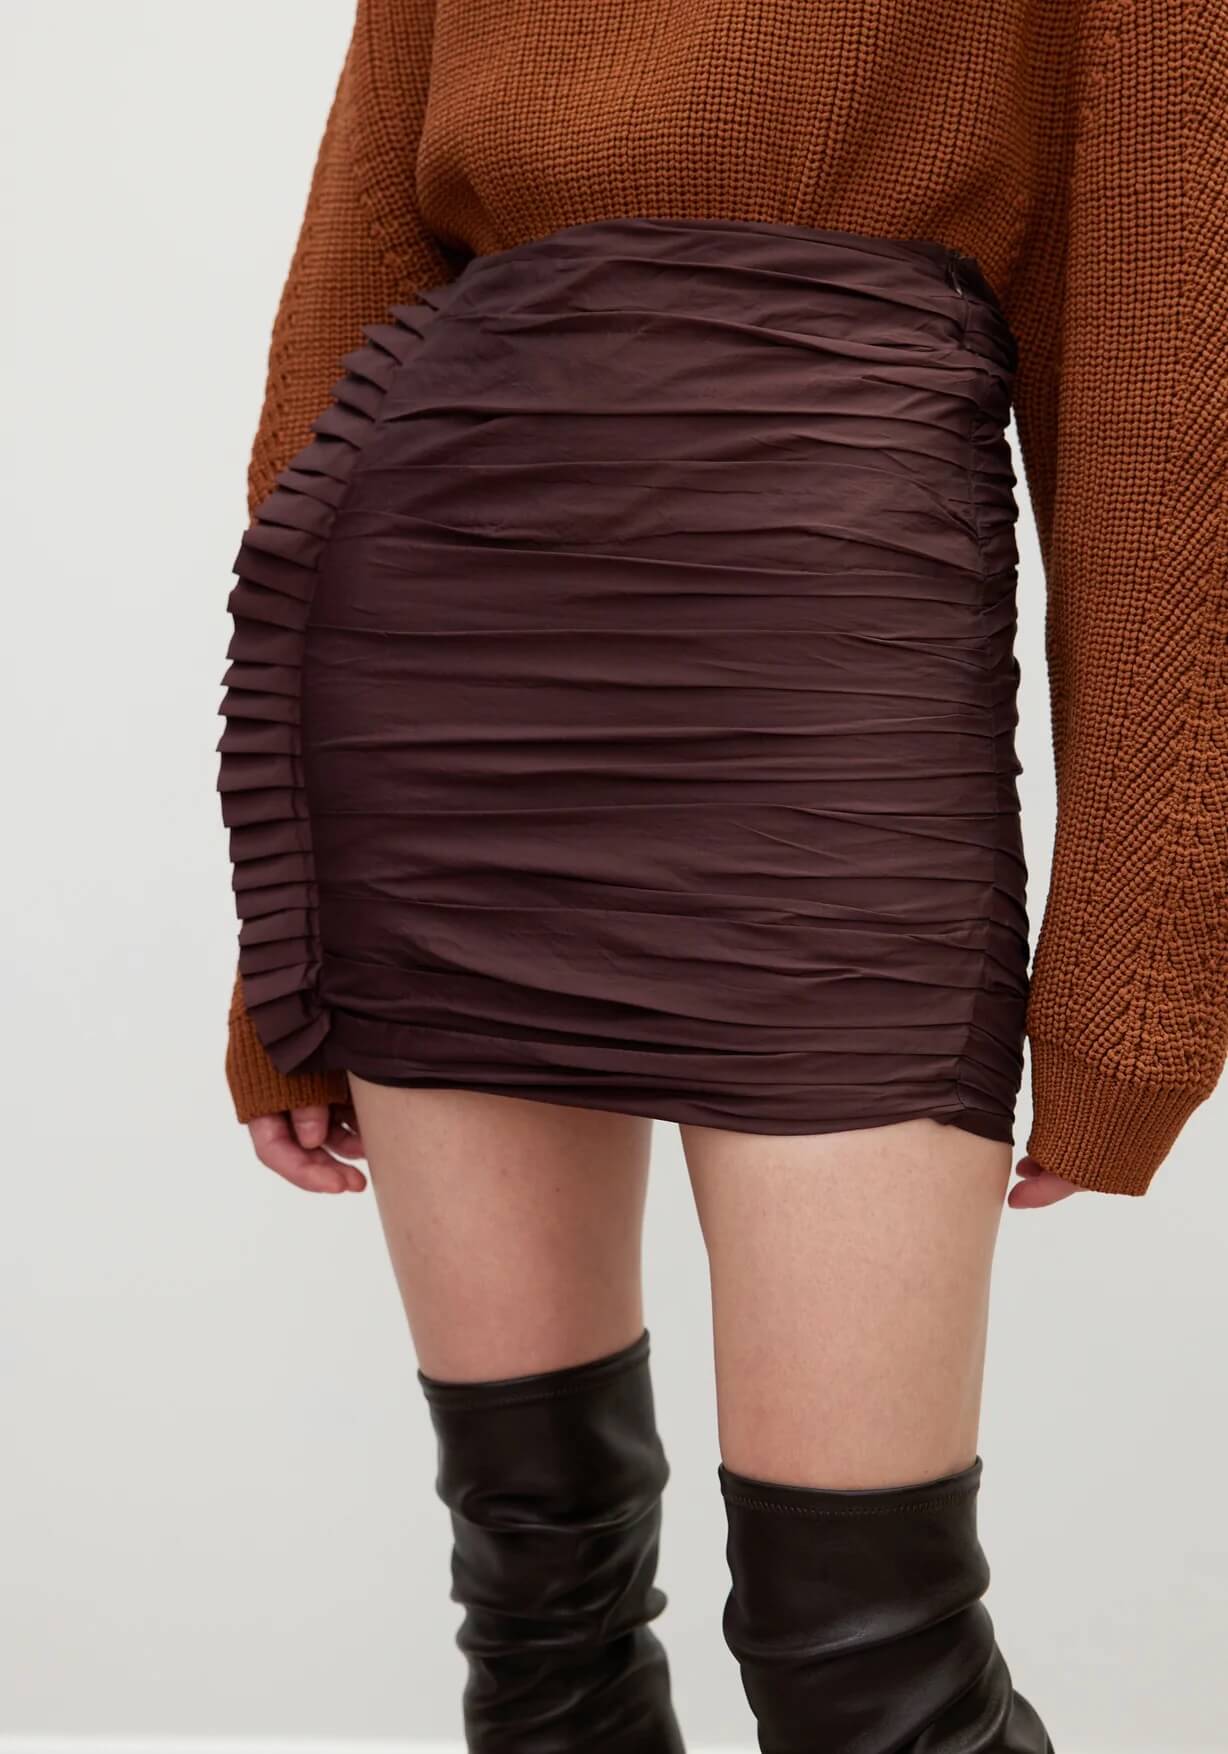 ROHE Denia Mini Skirt in Chocolate Brown from The New Trend